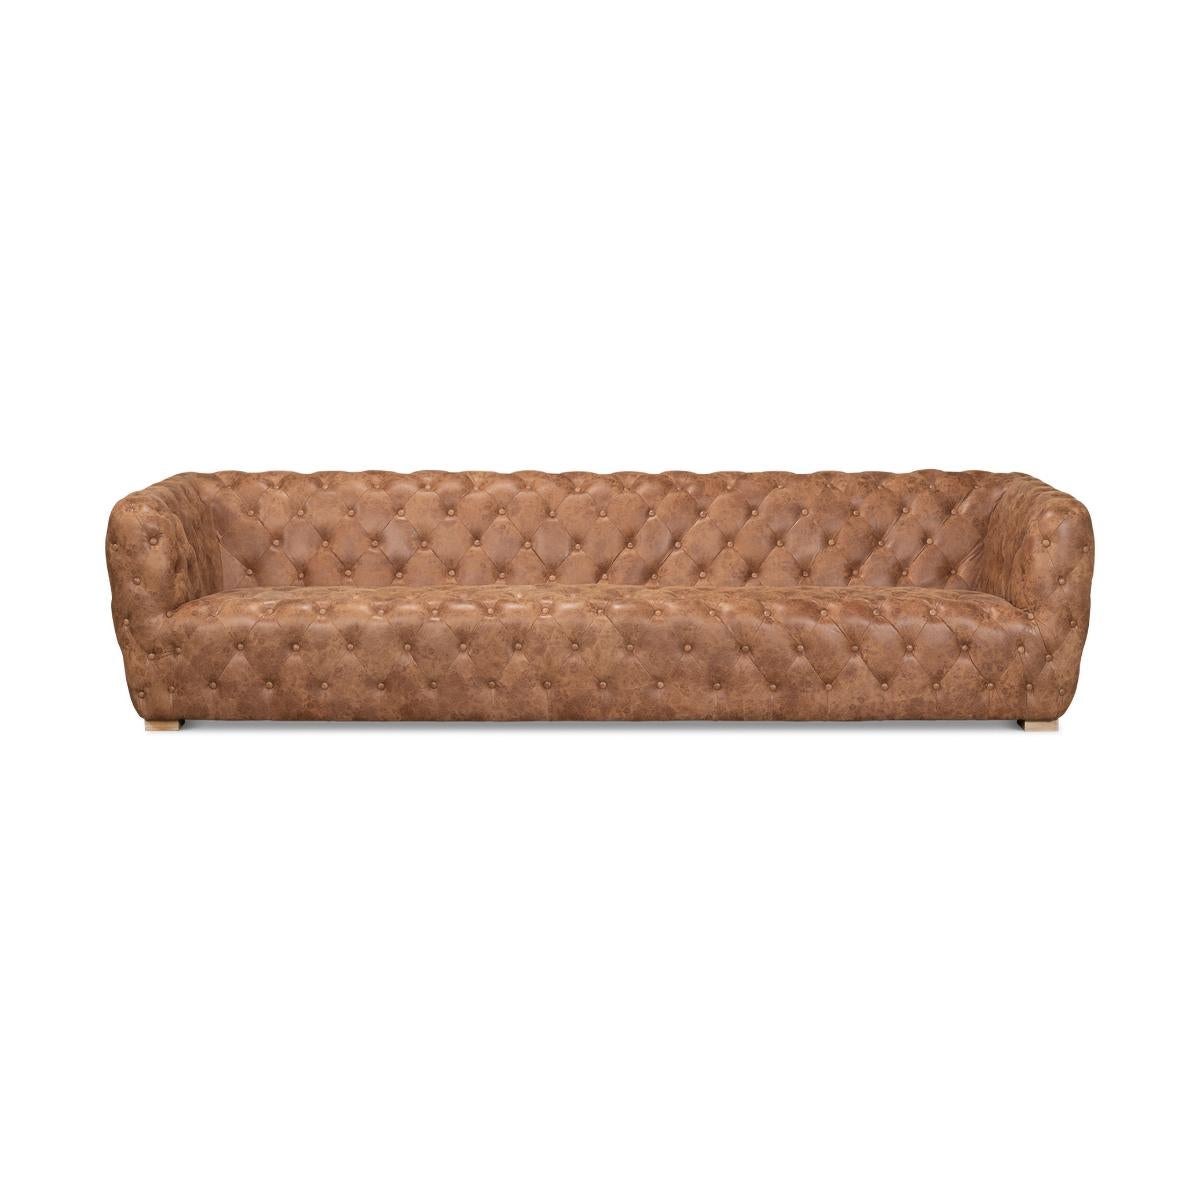 A contemporary-style tufted leather sofa with uniform back and arm height. This sofa has a generous long length and is tufted on its interior and exterior including back and sides. It is upholstered in transitional tan leather color and rests on